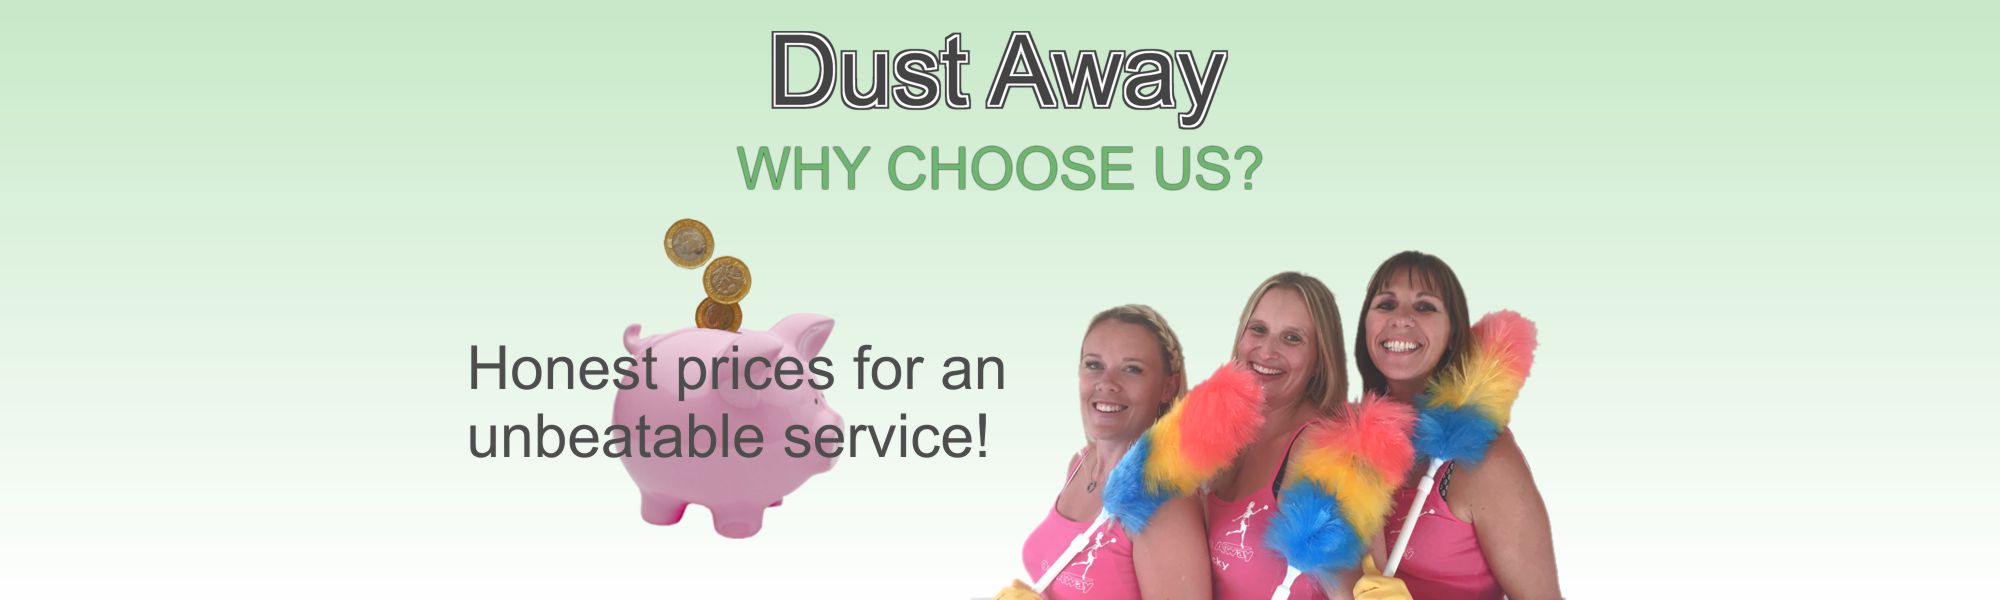 Dust Away | Domestic & Commercial Cleaning Services | Littlehampton